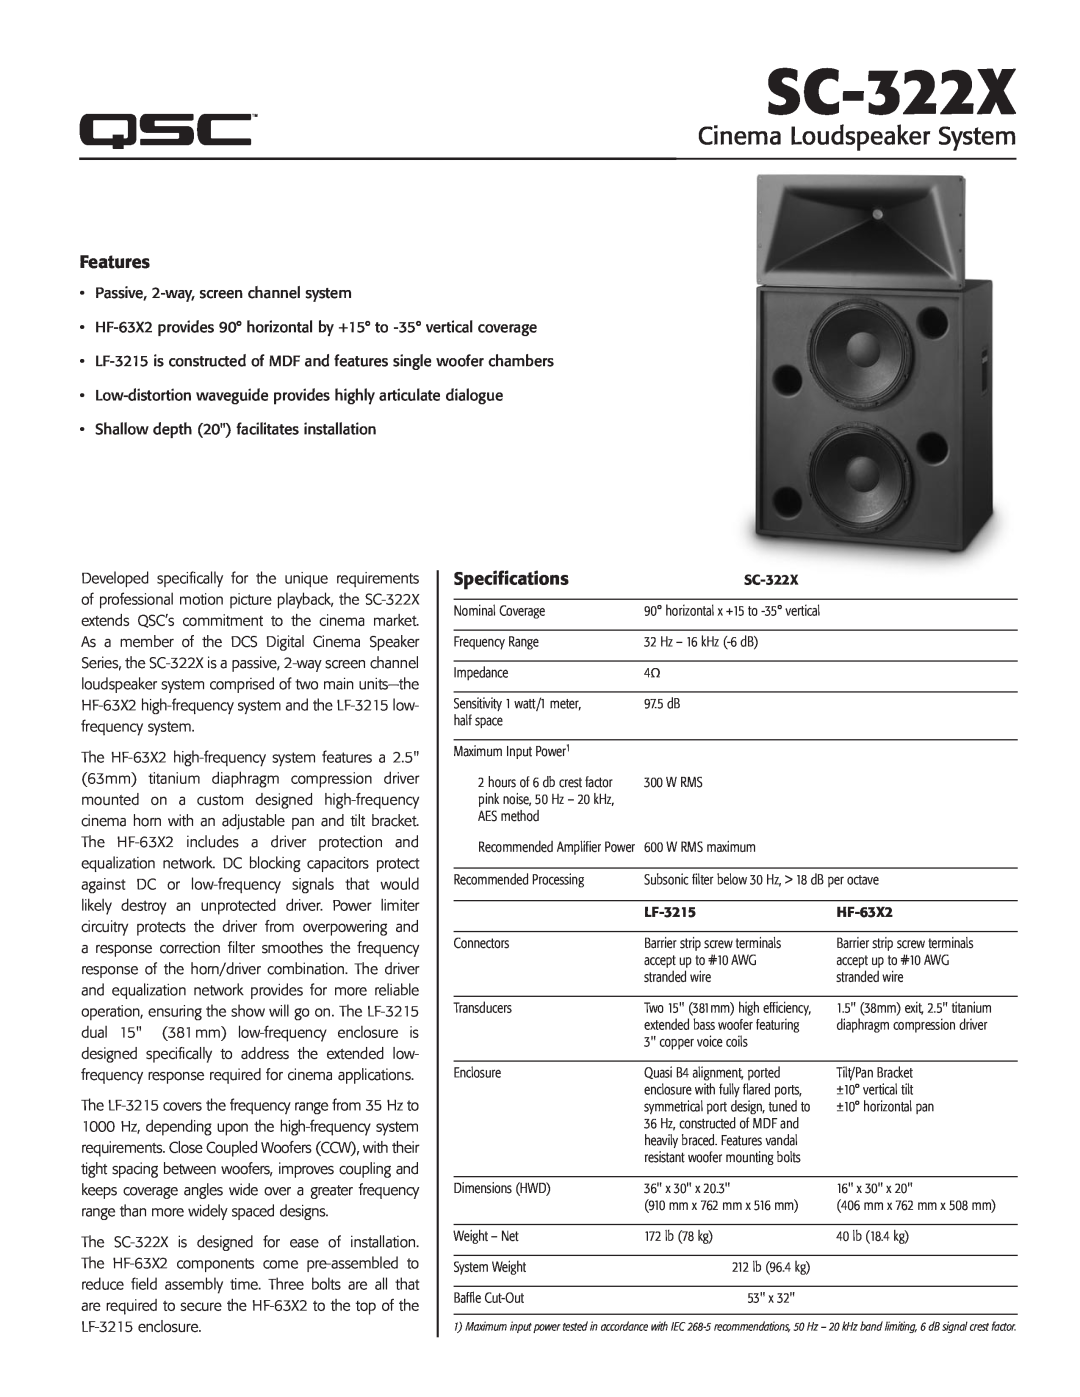 QSC Audio HF-63X2, LF-3215 specifications Features, Specifications, SC-322X, Cinema Loudspeaker System 